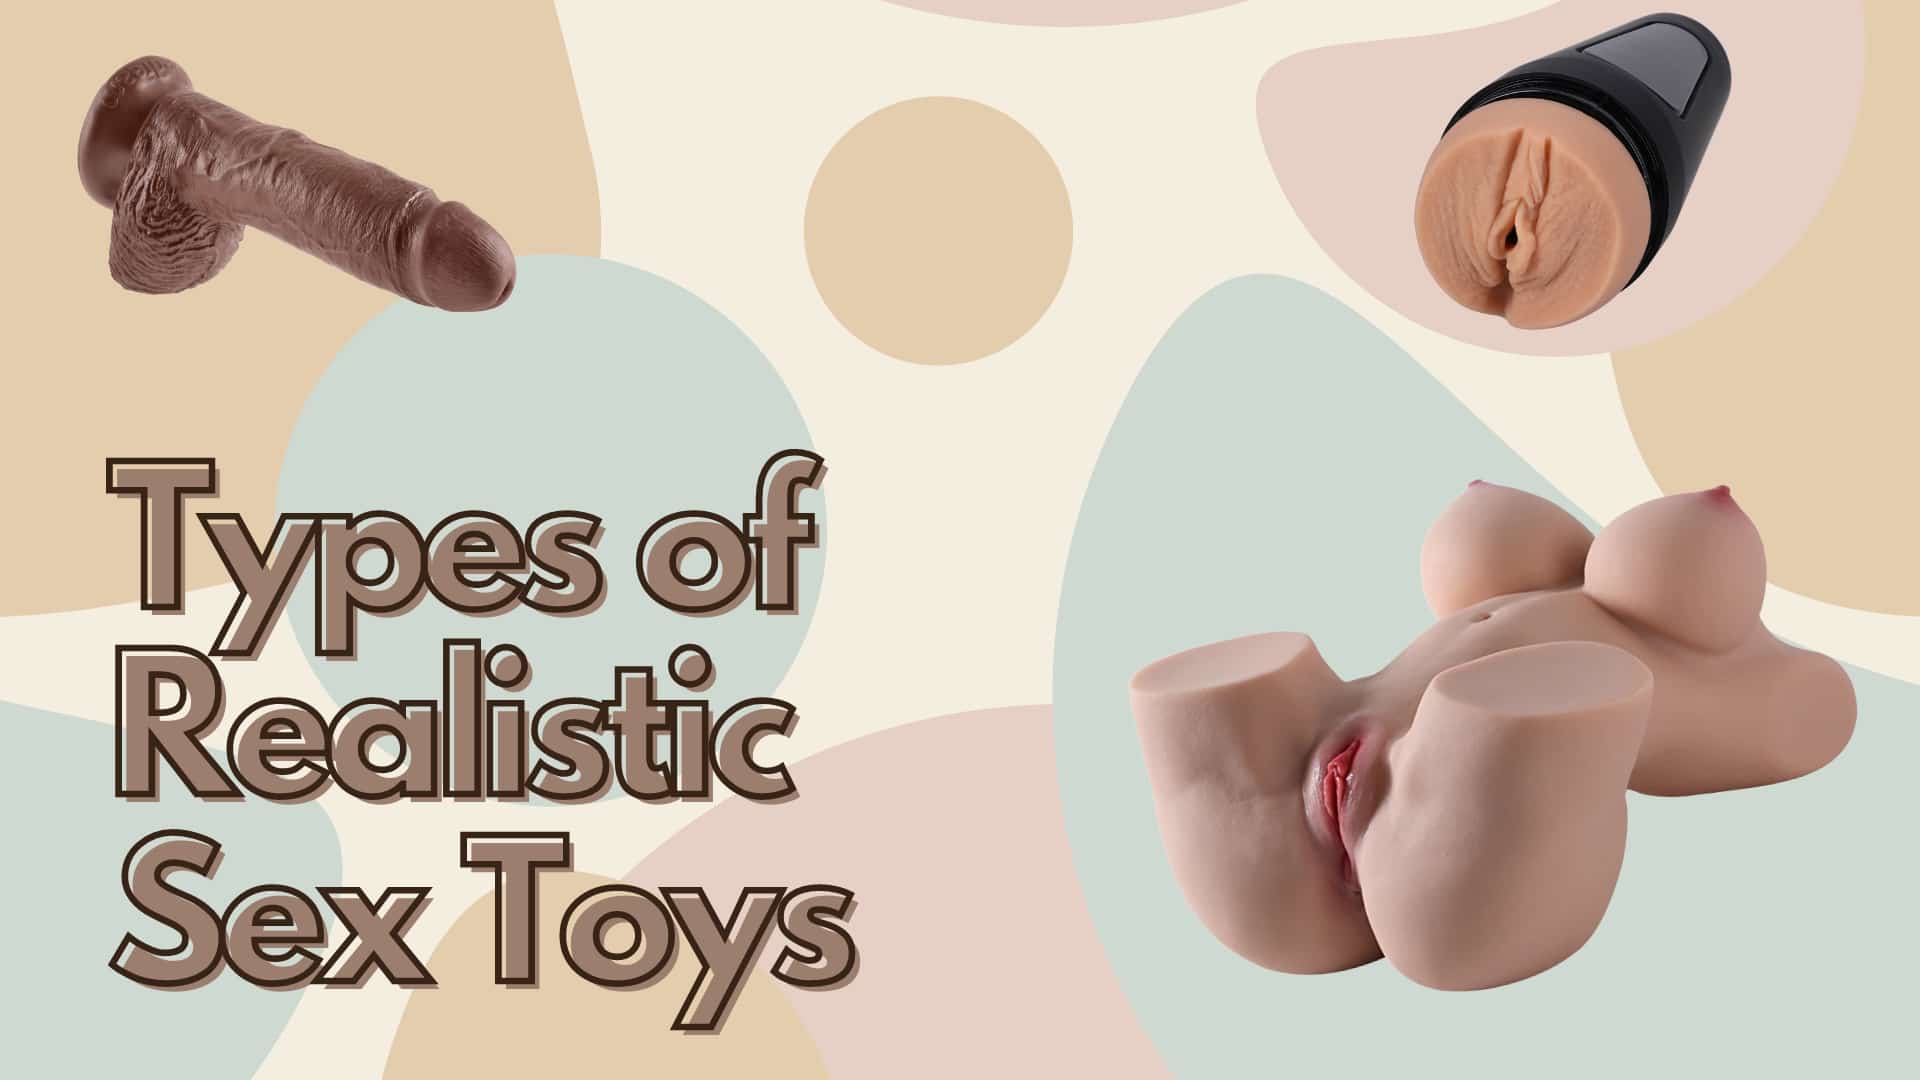 Types of Realistic Sex Toys: The Real Deal